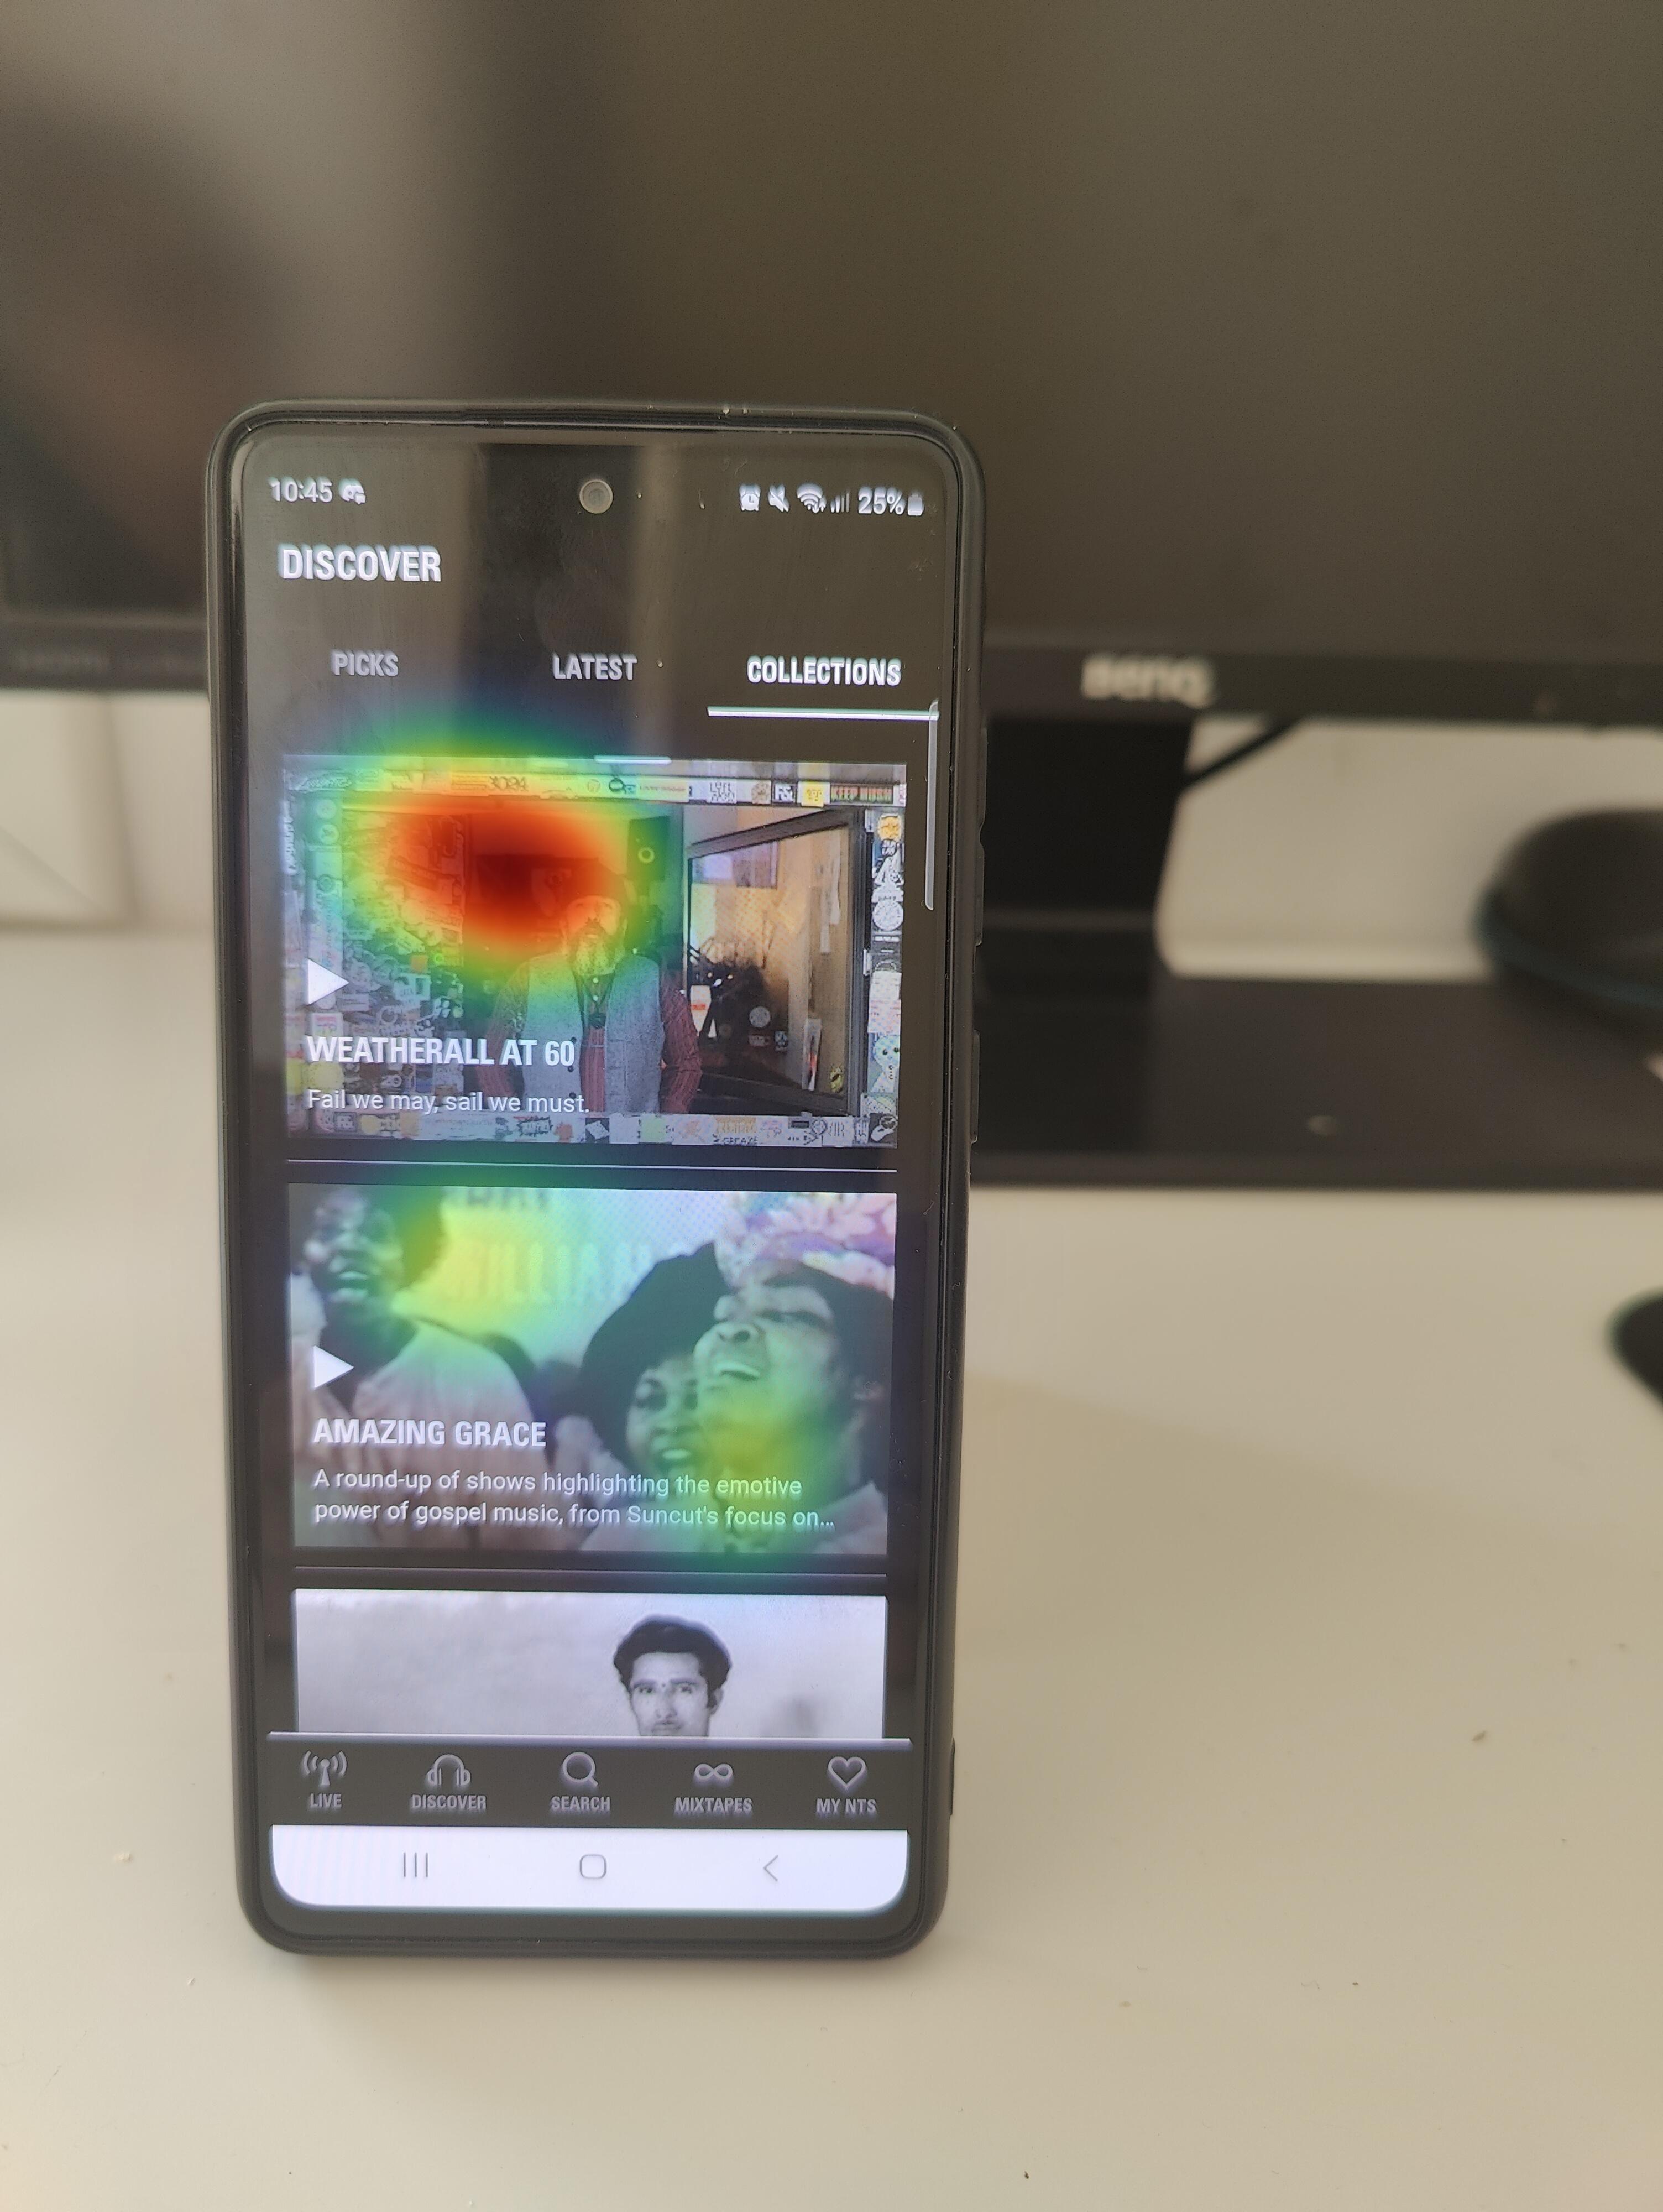 Saliency map over a phone screen